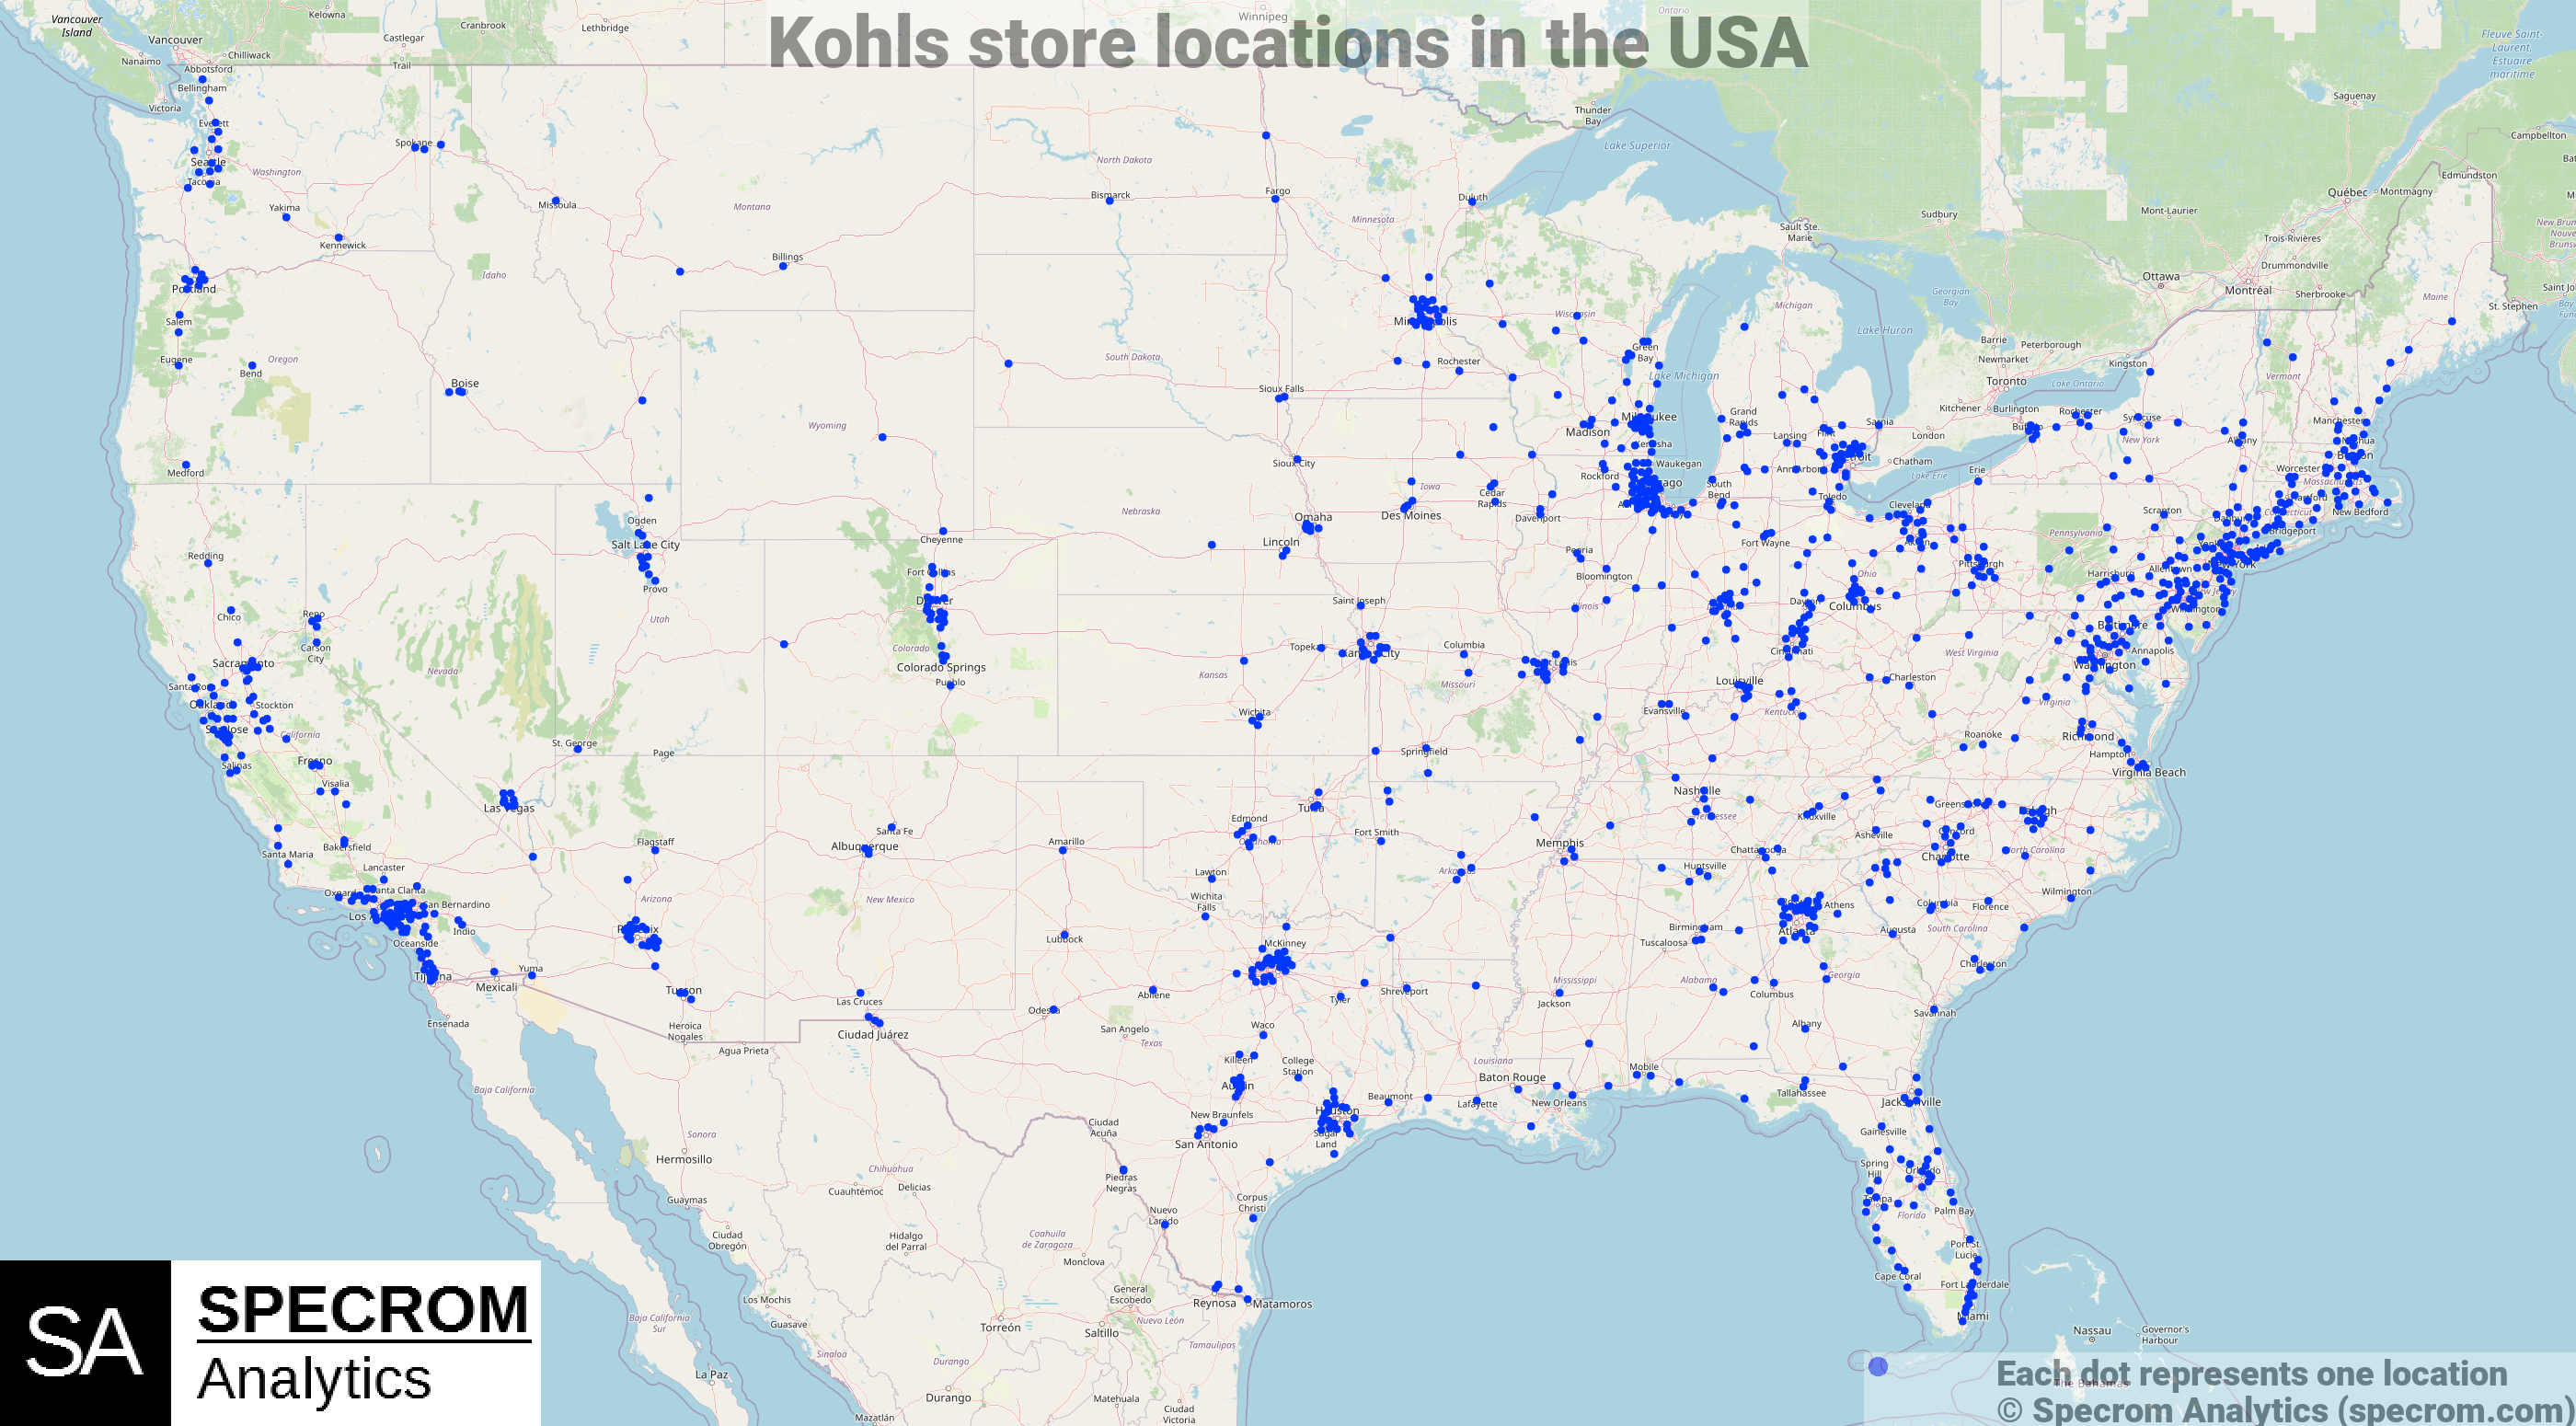 Kohls store locations in the USA